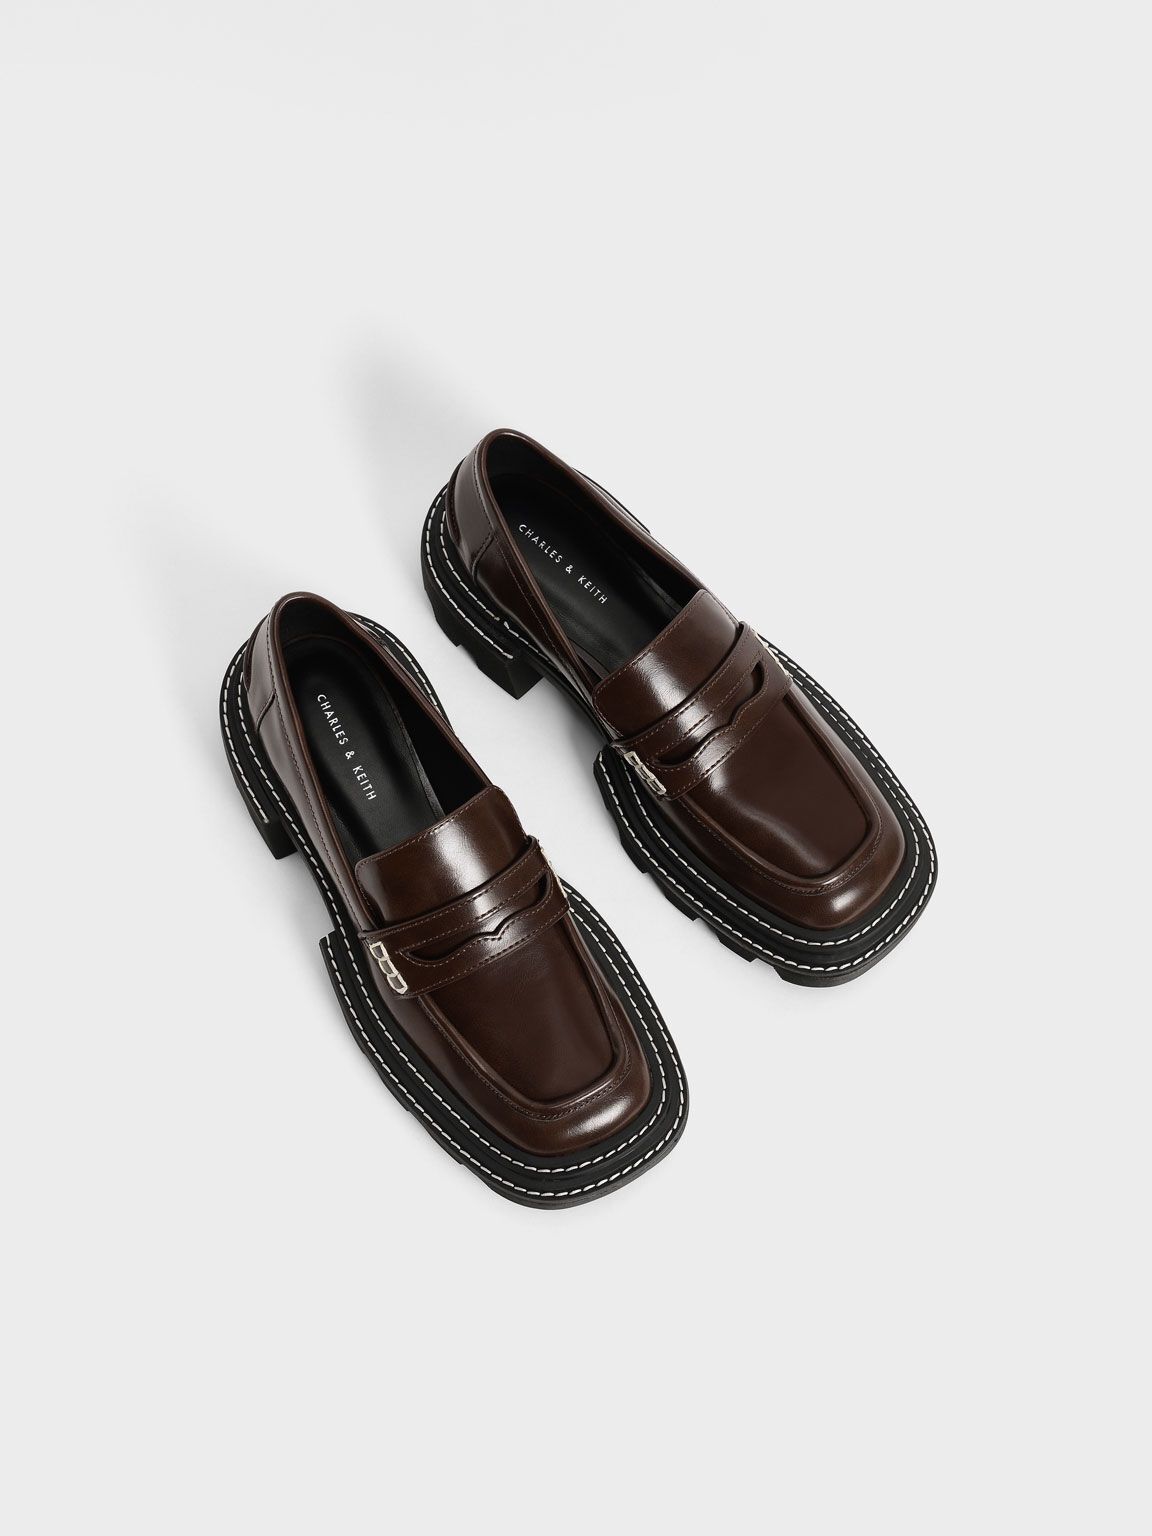 Stylish and Comfortable: Elevating Your Look with Brown Loafers